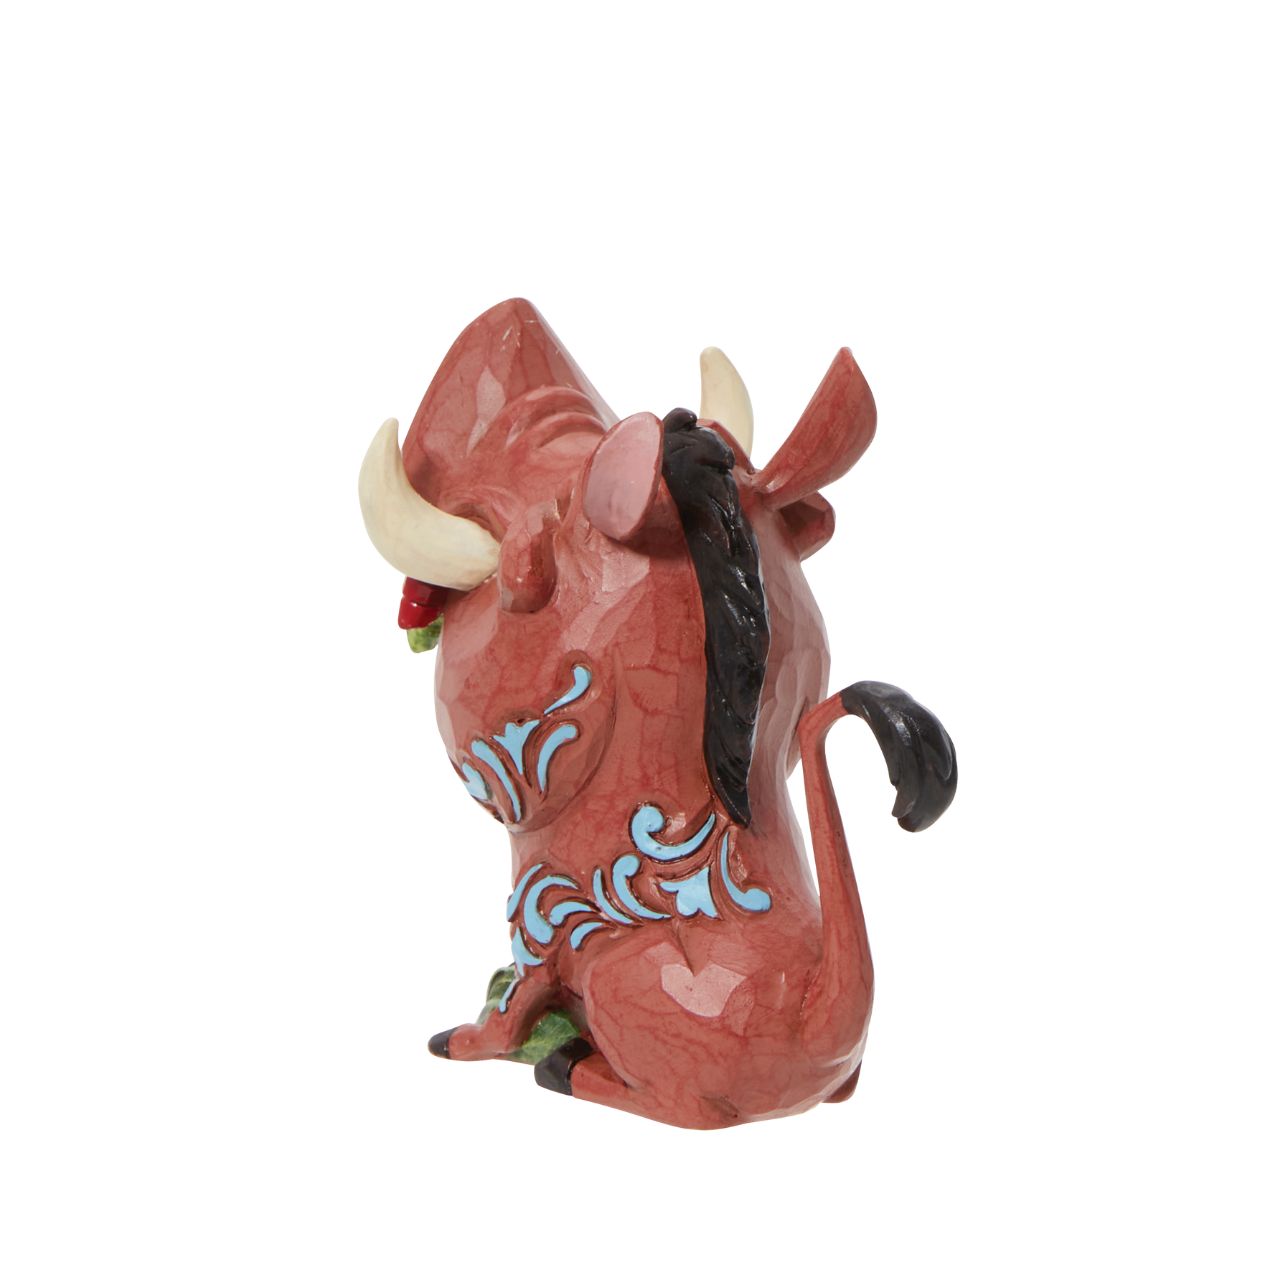 Pumba from the classic 1994 film The Lion King has been immortalised in this mini figurine. Designed by award winning artist Jim Shore, hand crafted using high quality cast stone and hand painted. Packaging: Full colour, fully branded gift box with photo.